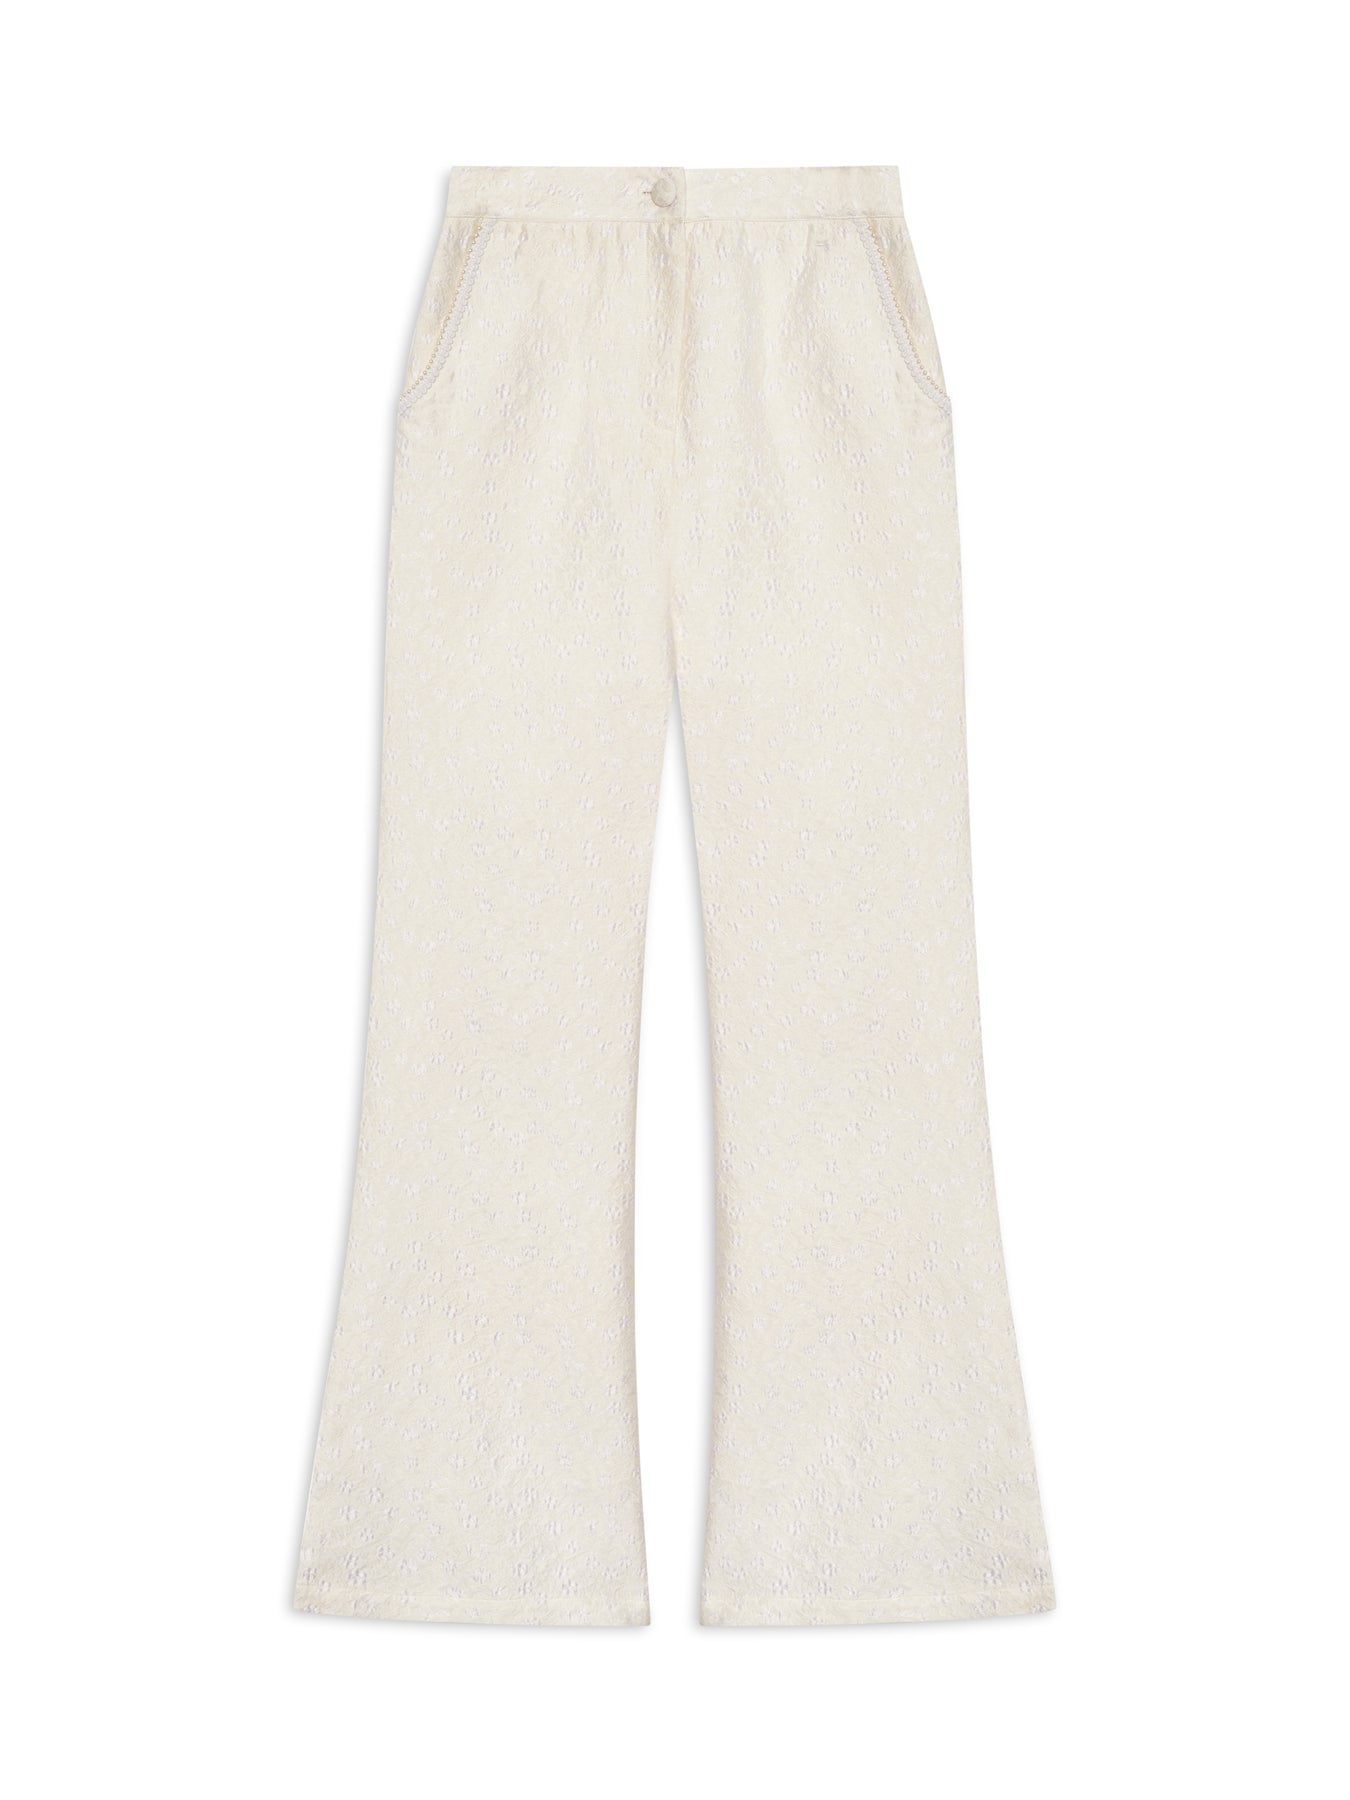 Evie Jacquard Flared Trousers